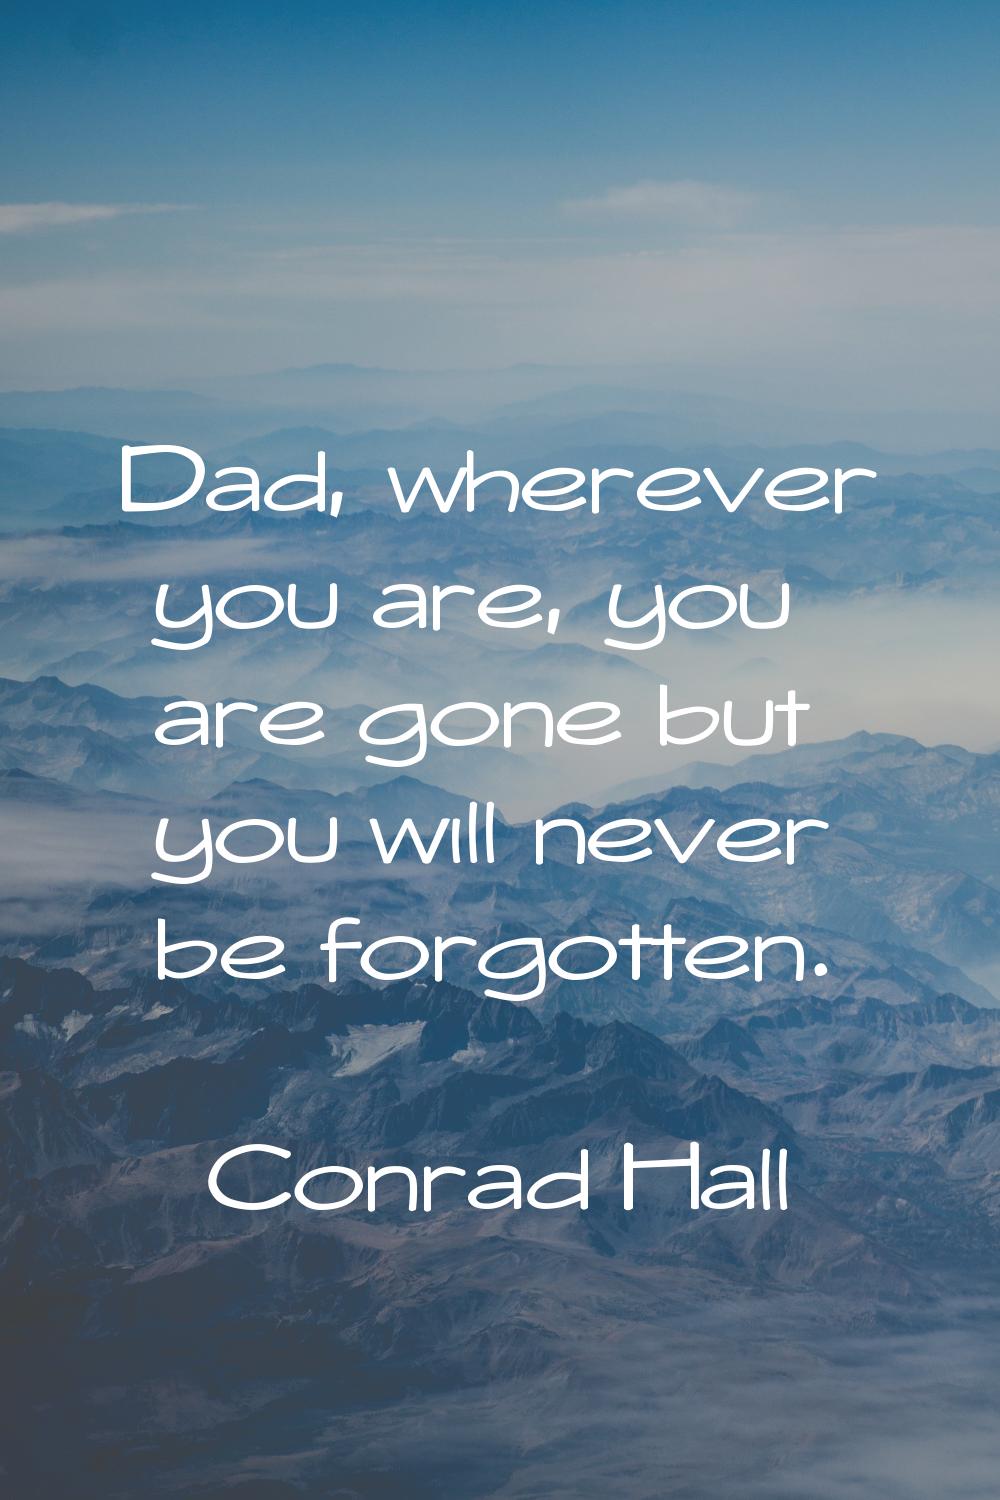 Dad, wherever you are, you are gone but you will never be forgotten.